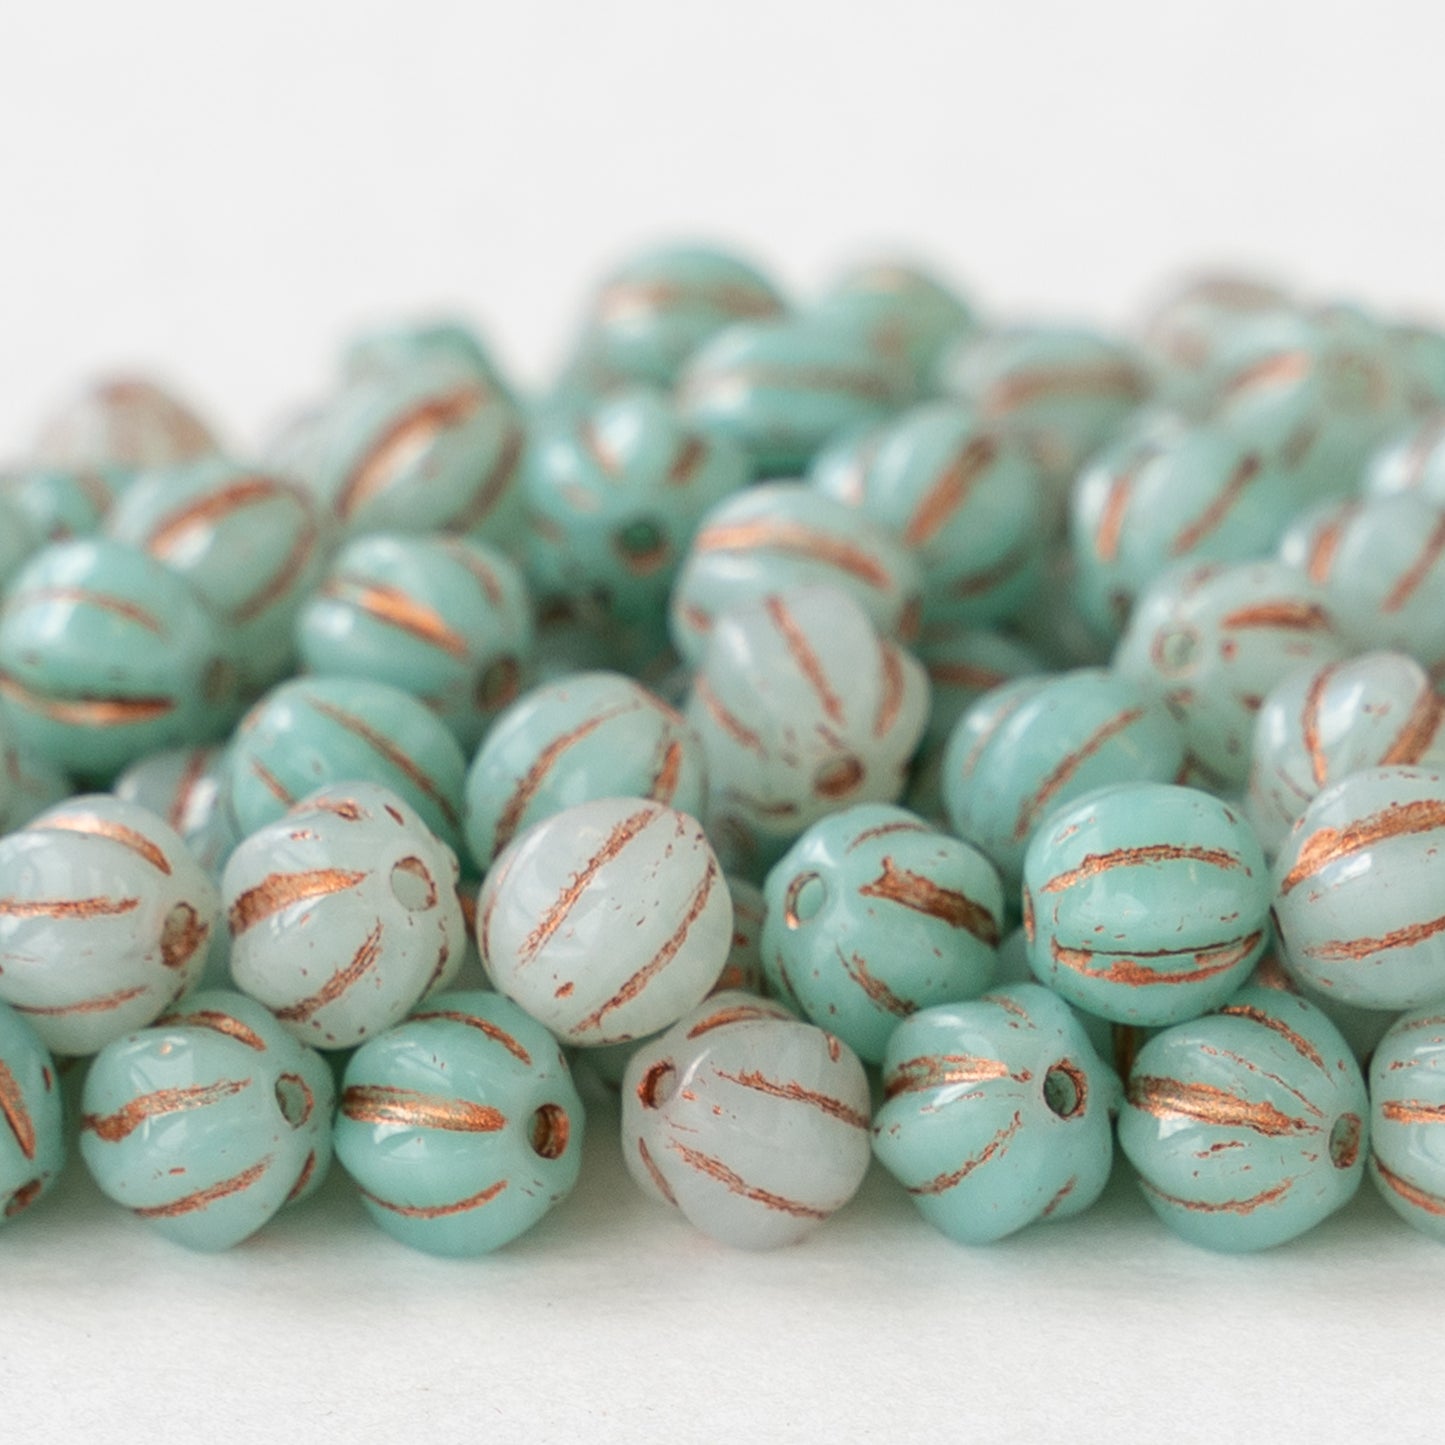 6mm Glass Beads - Seafoam Green & White with Copper Wash - 50 or